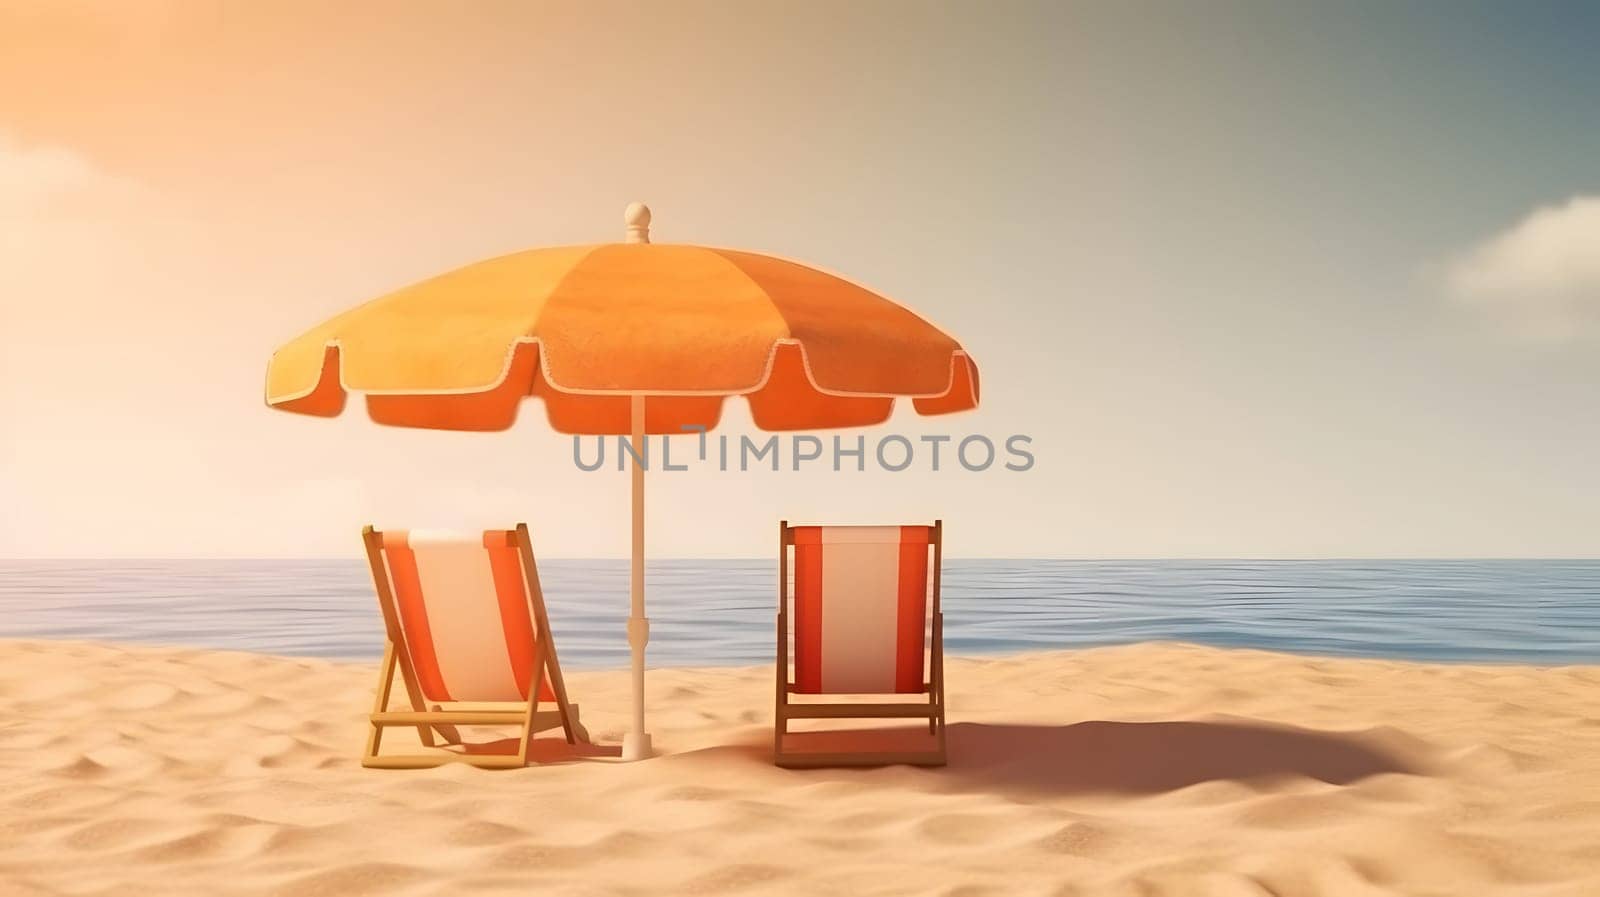 Orange beach umbrella with chairs on the sand beach - summer vacation theme header. Neural network generated in May 2023. Not based on any actual person, scene or pattern.